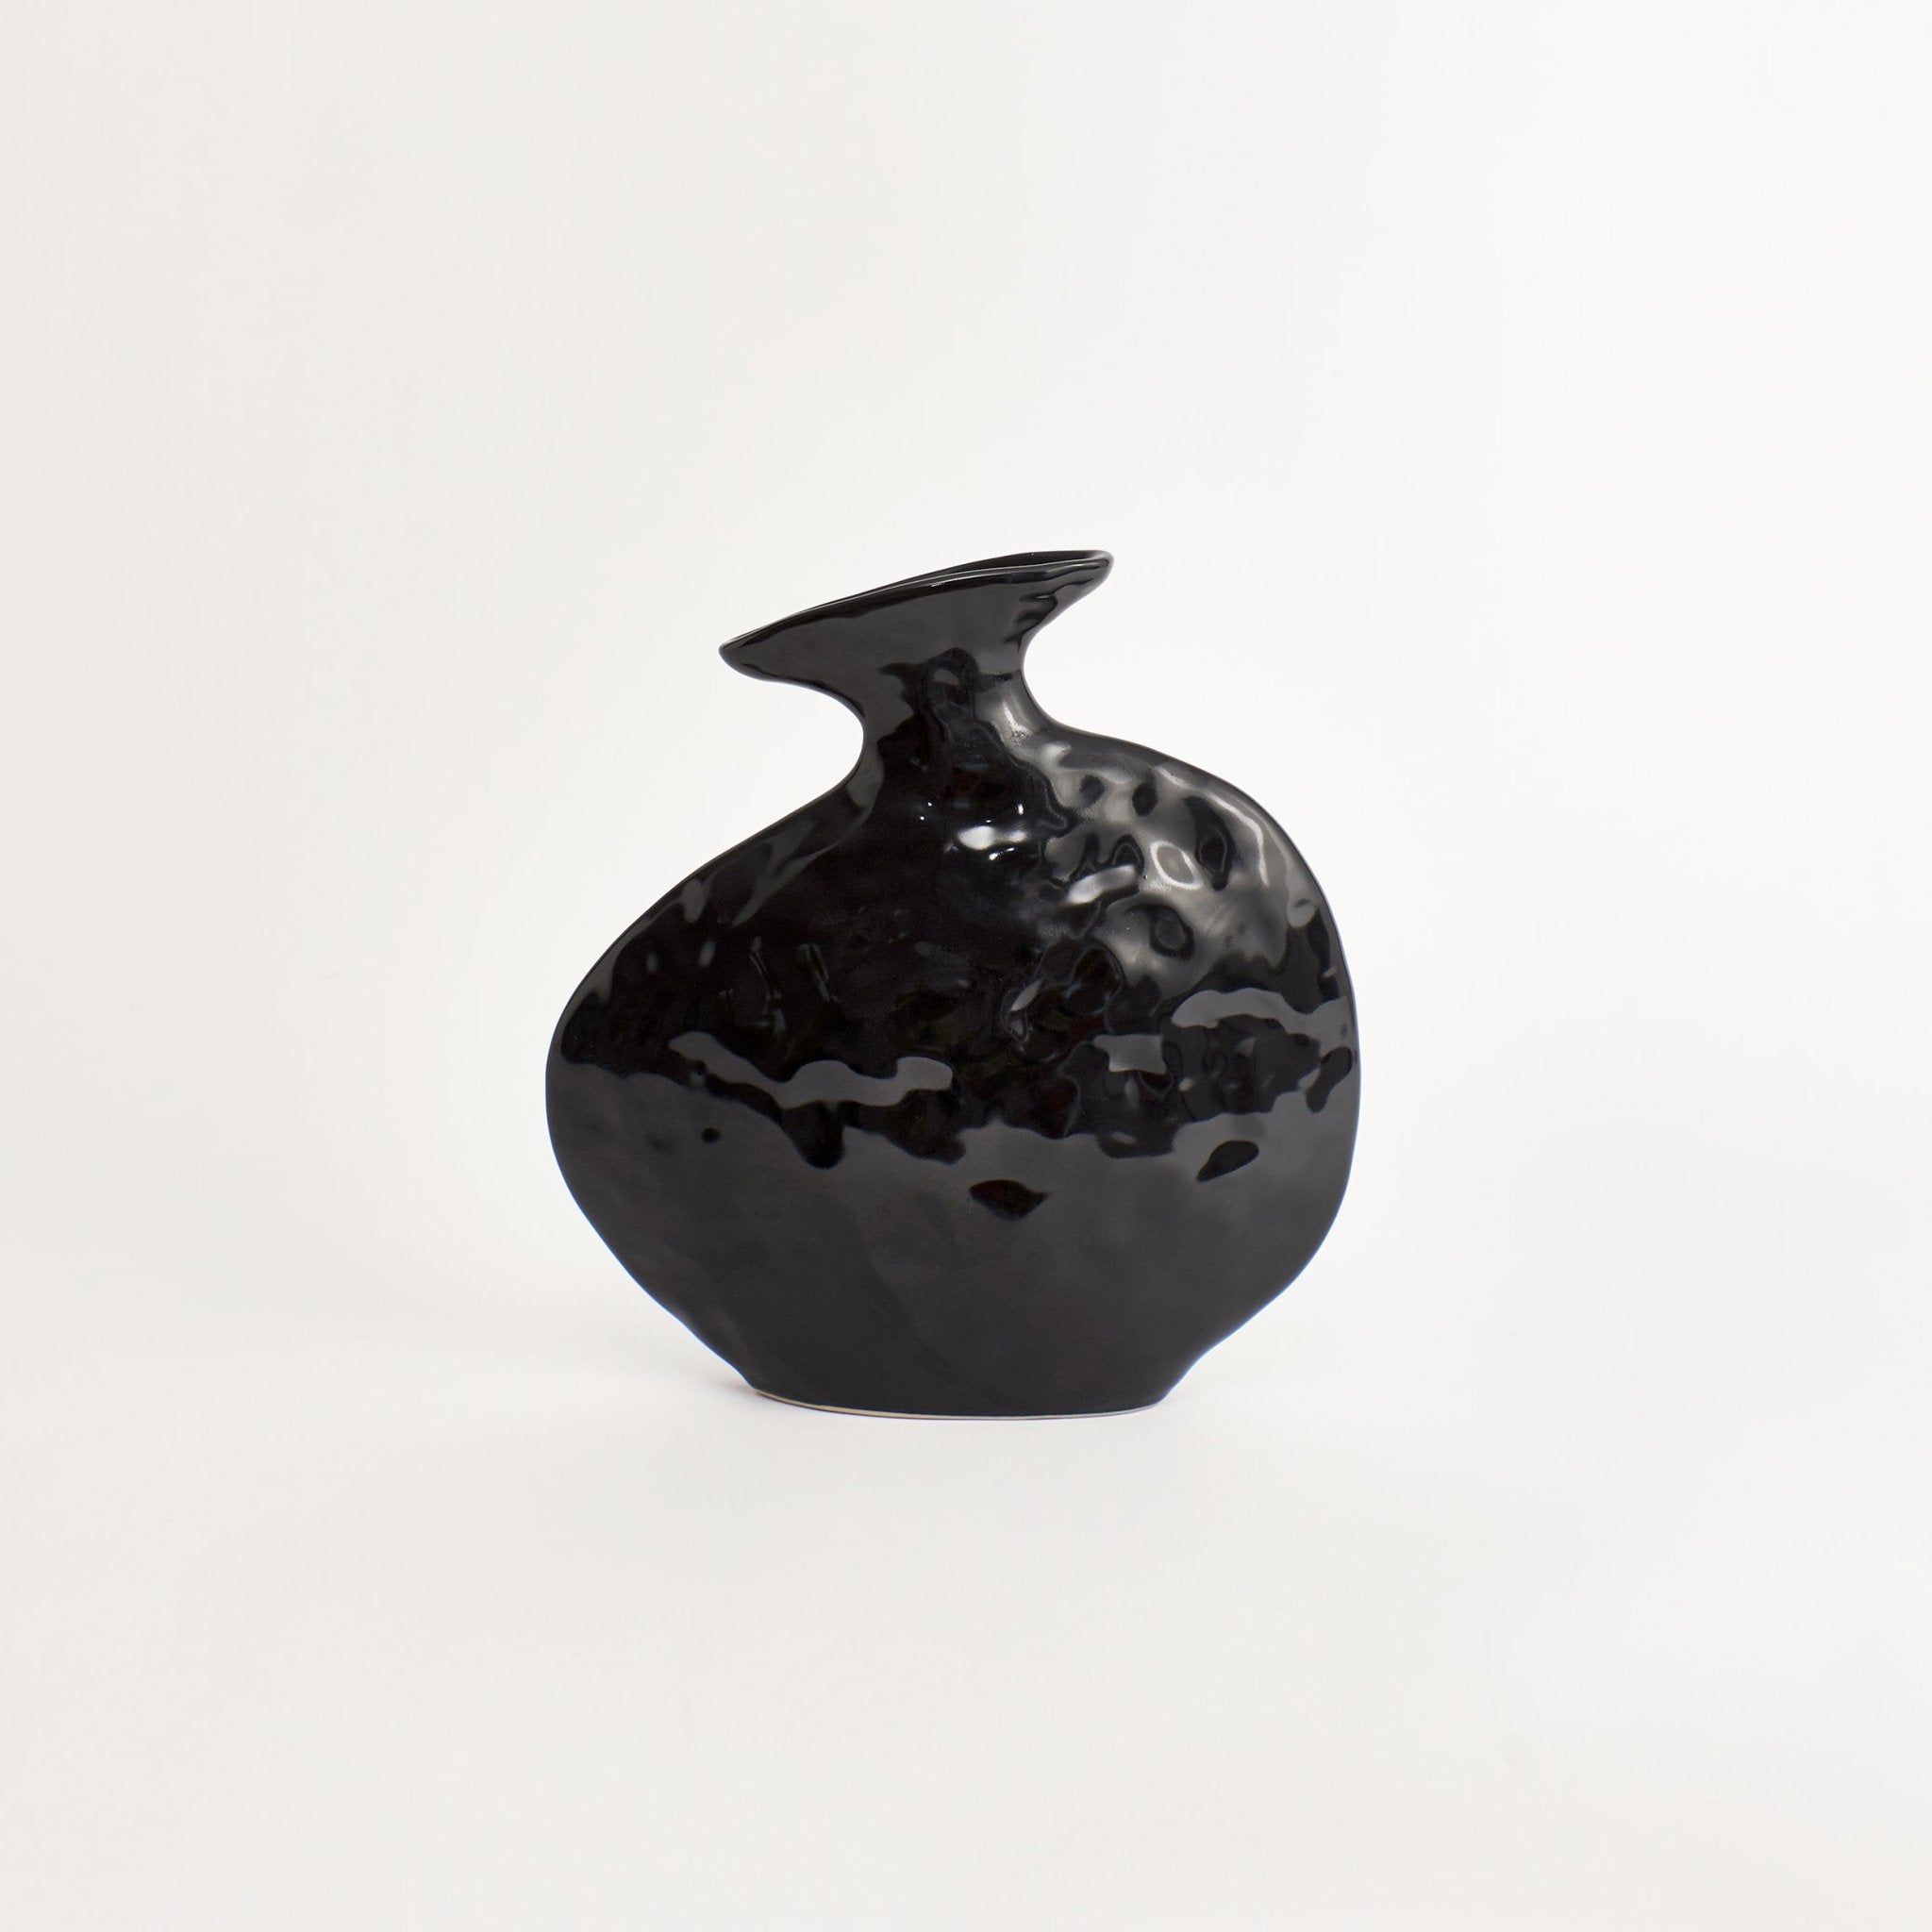 Flat Vase - Black vase from Project 213A